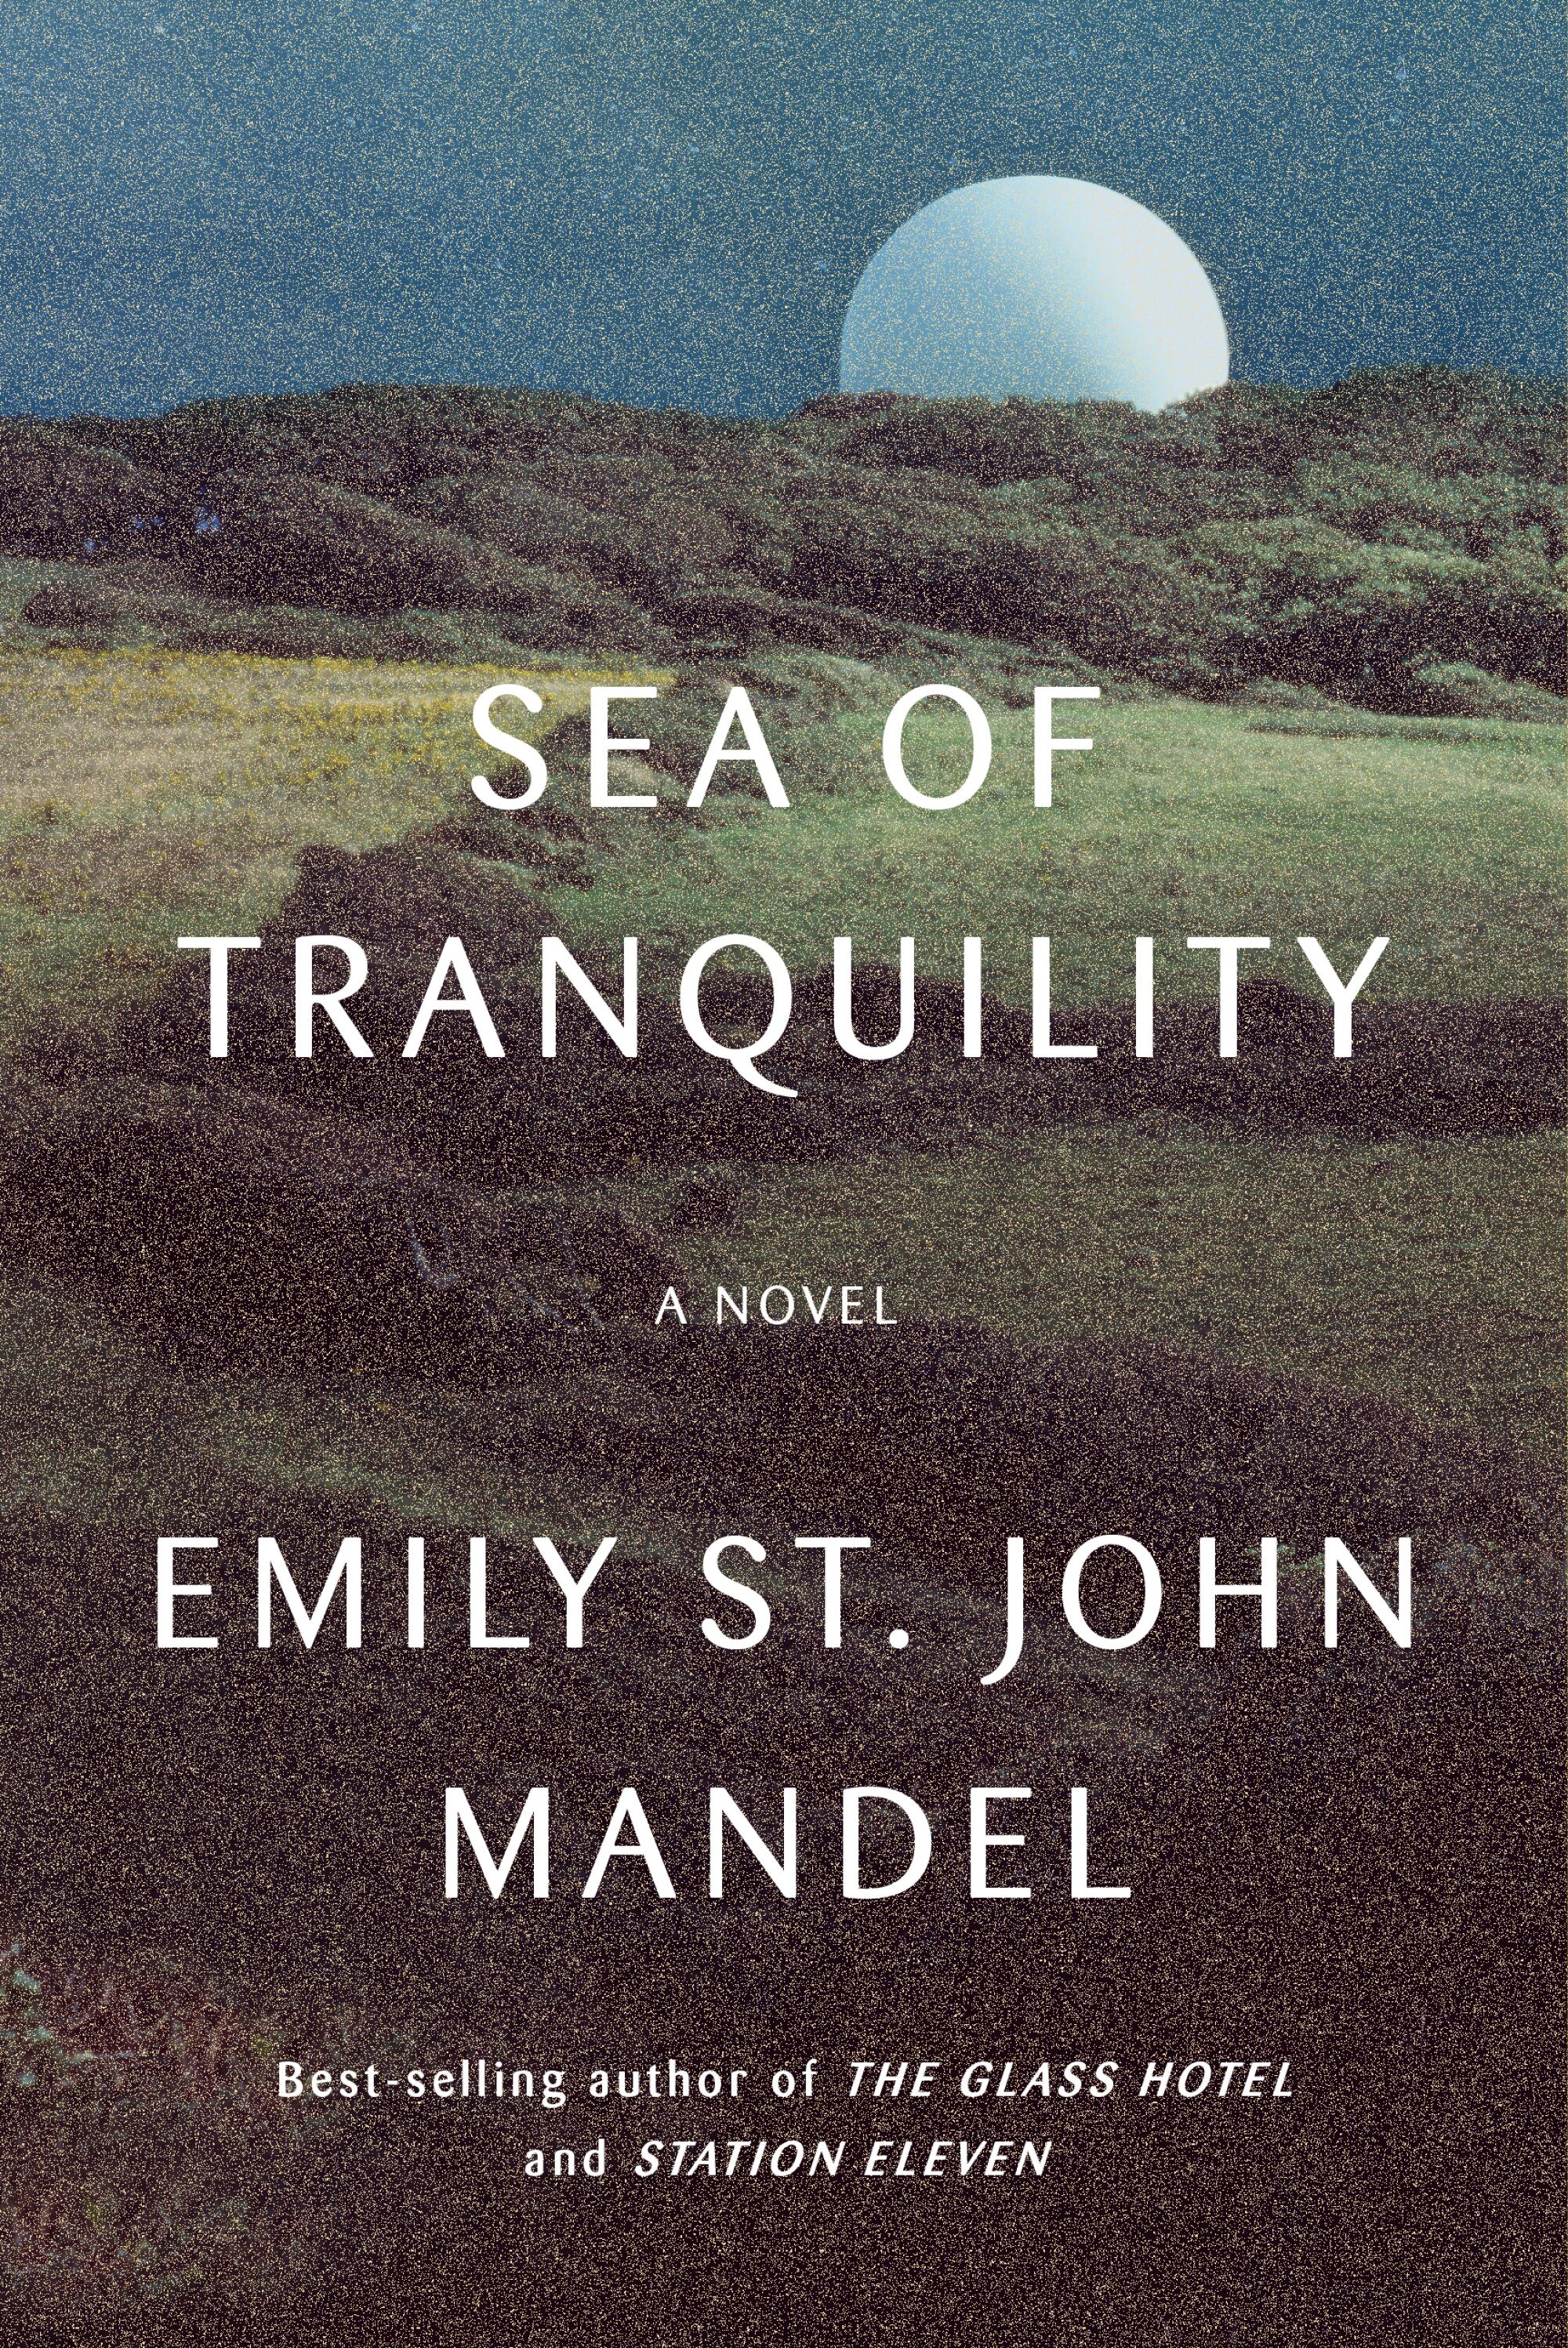 moon rises behind a hilly meadow on cover of 'Sea of Tranquility.'